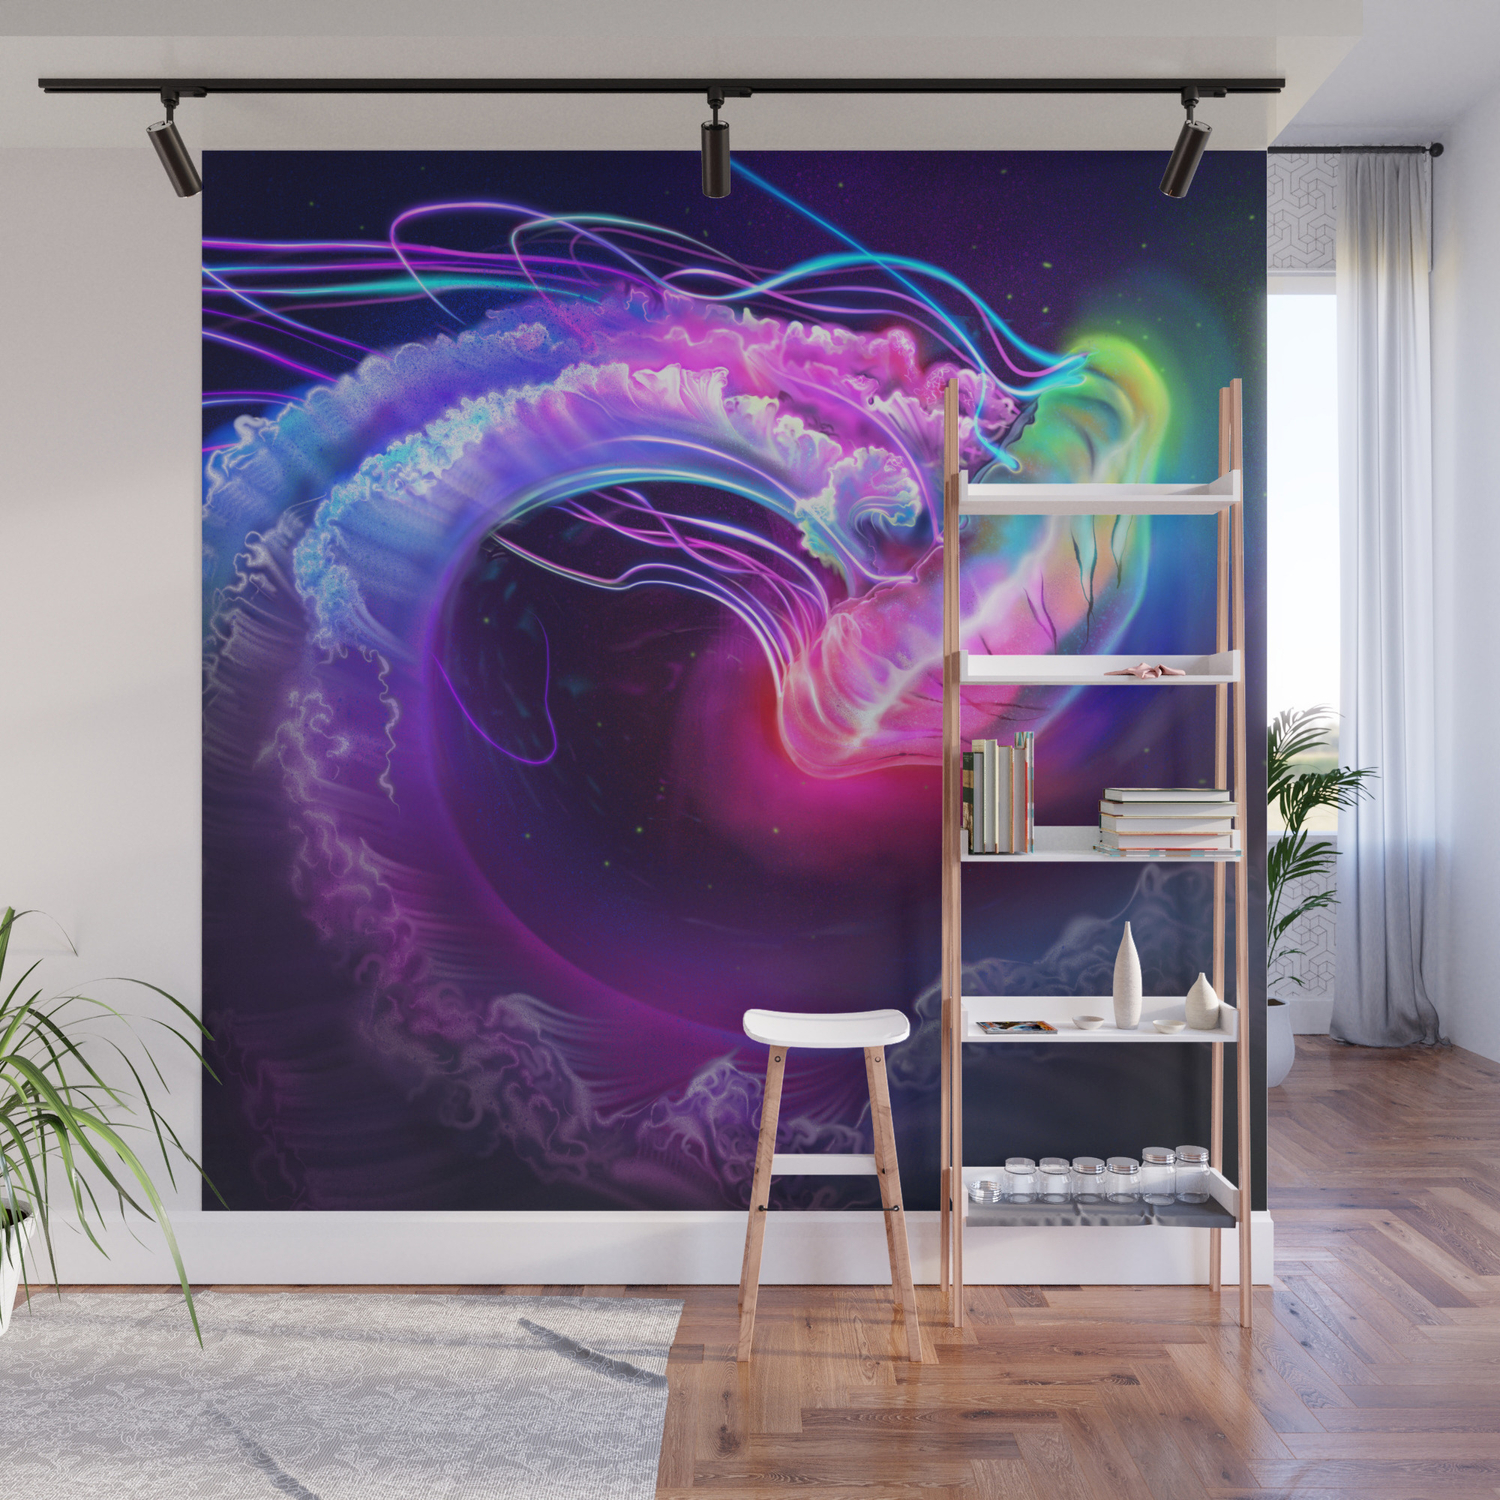 Removable Wall Art Mural 18x24 Scott Campbells Hovering Spotted Jelly 3 